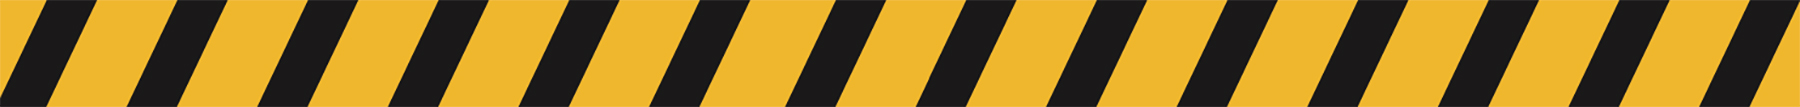 An illustrative representation of a yellow caution warning symbol banner that has fourteen black stripes across